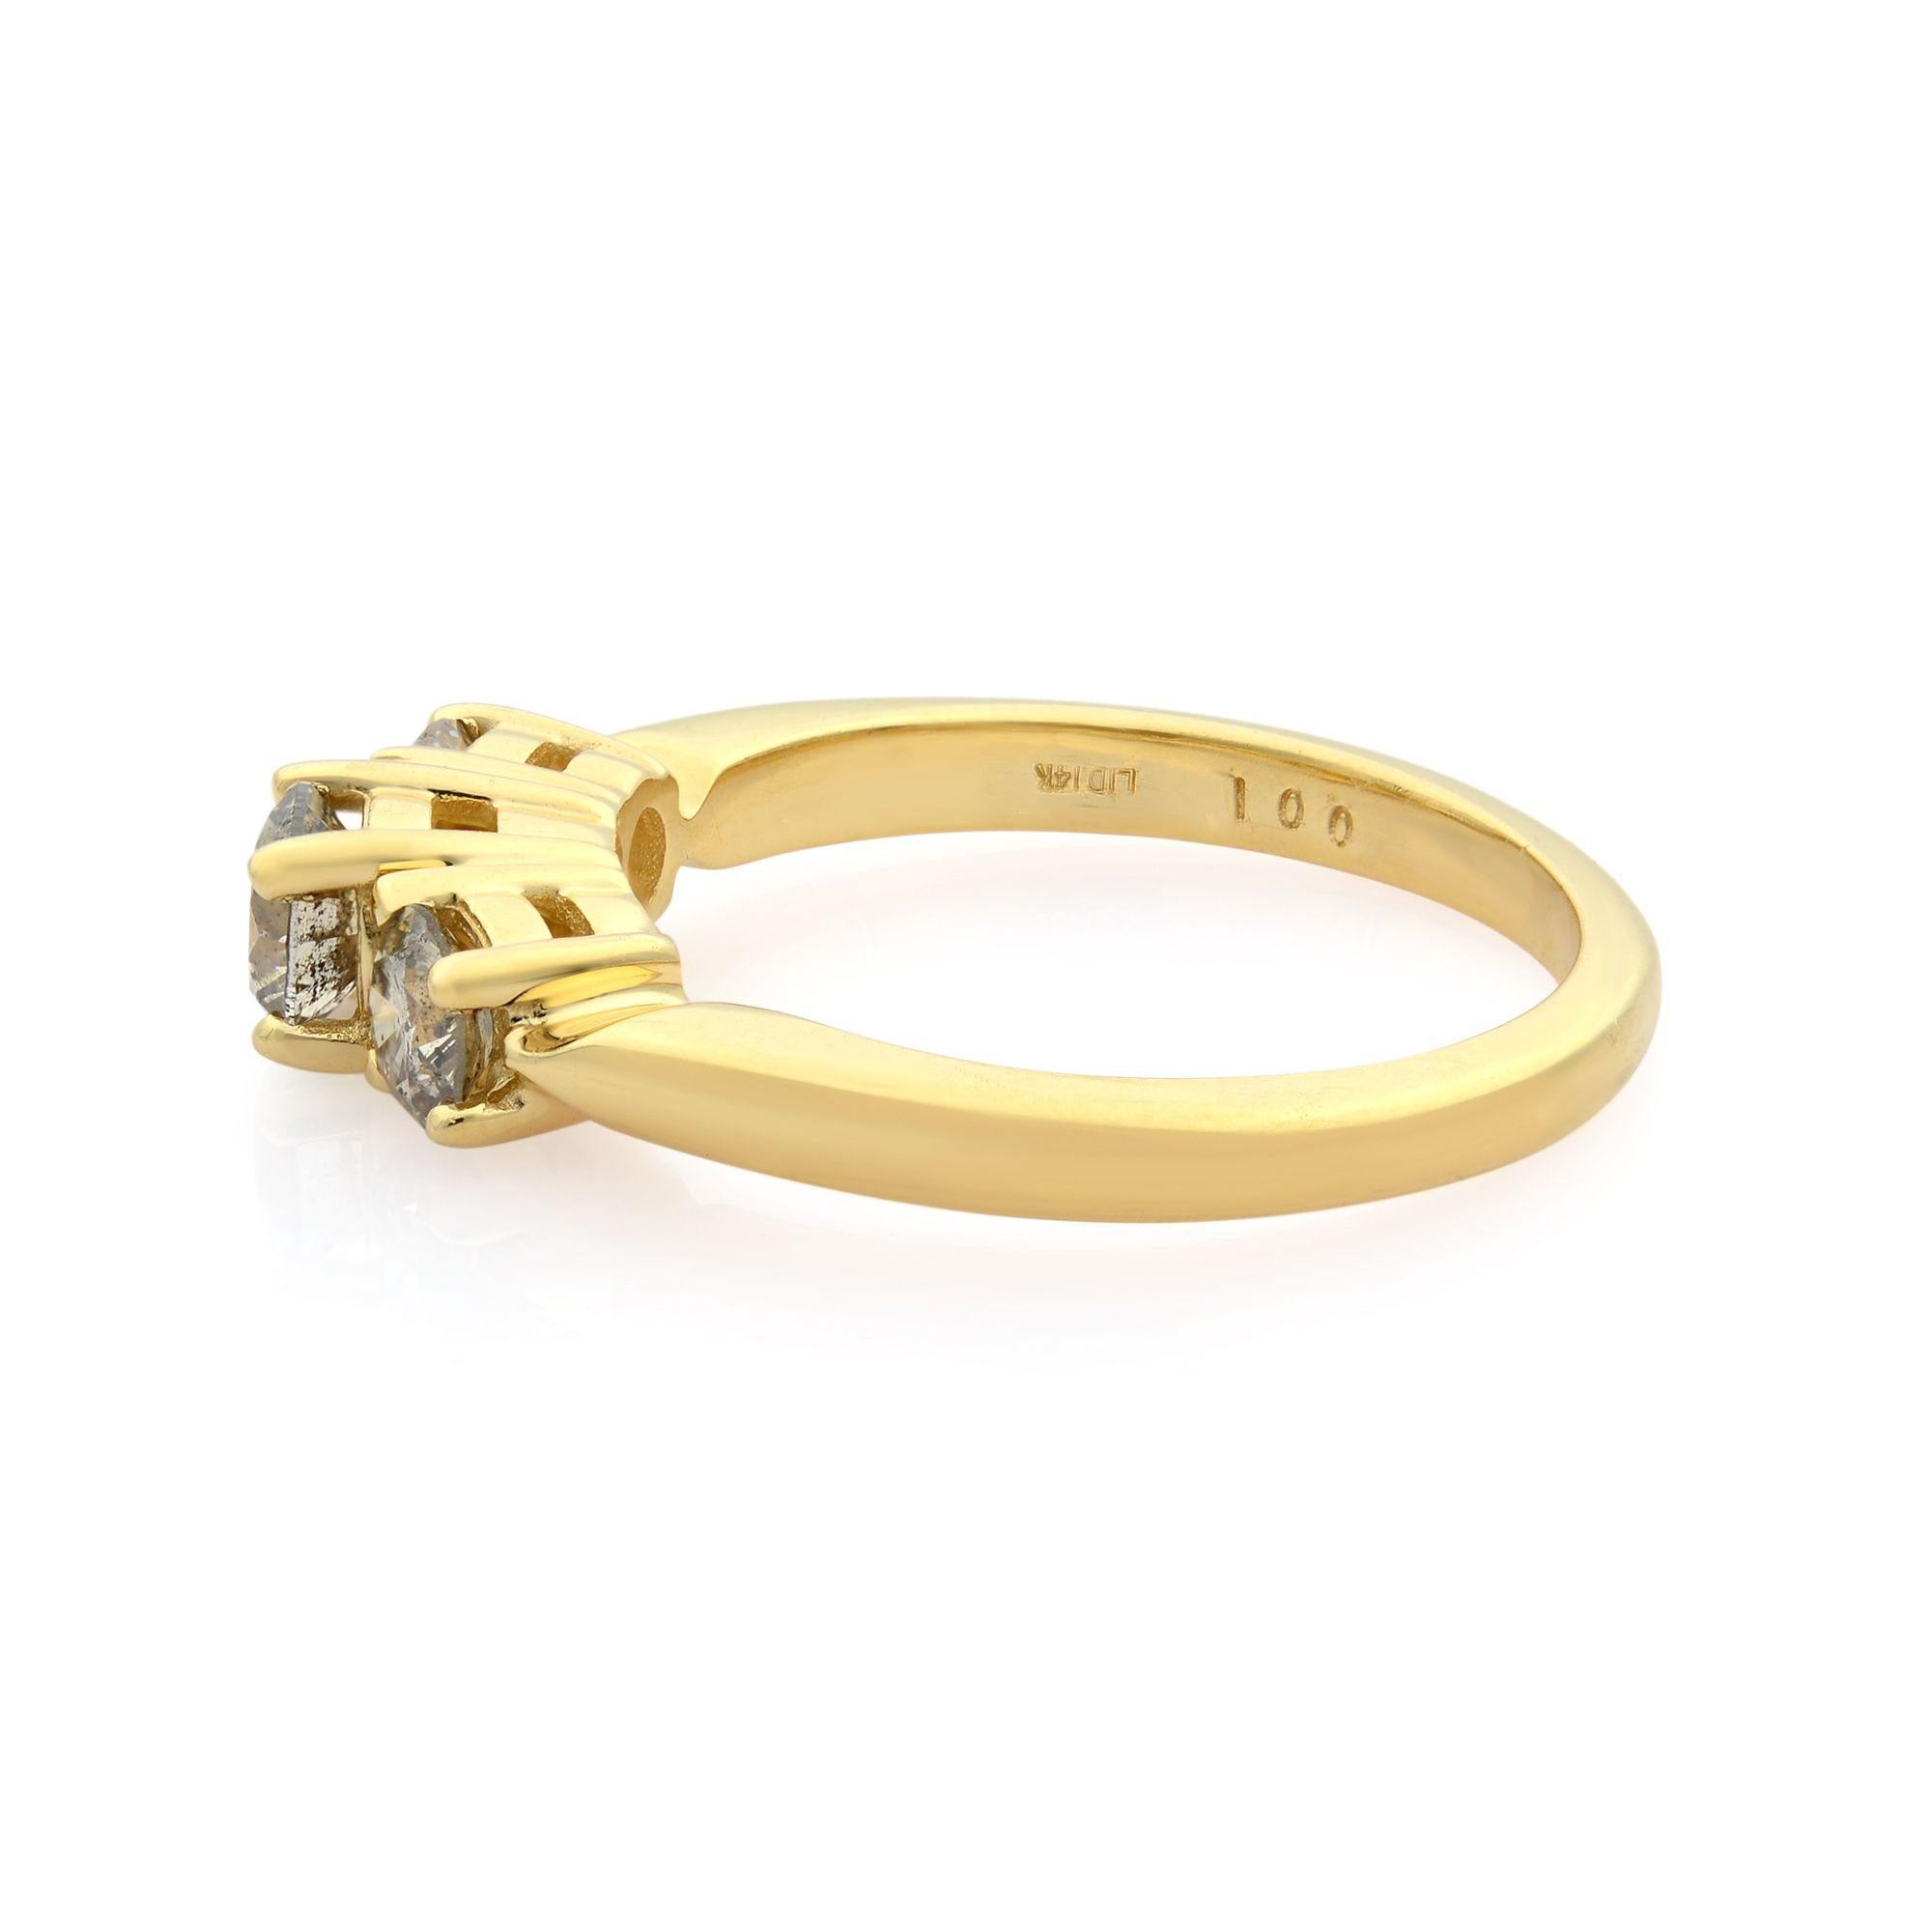 This three stone ring features a prong-set round diamond in the center, flanked by smaller diamonds. The setting lends a beautiful side view to this 14k yellow gold engagement ring. Total carat weight: 1.00. Diamonds are SI1 clarity and I color.